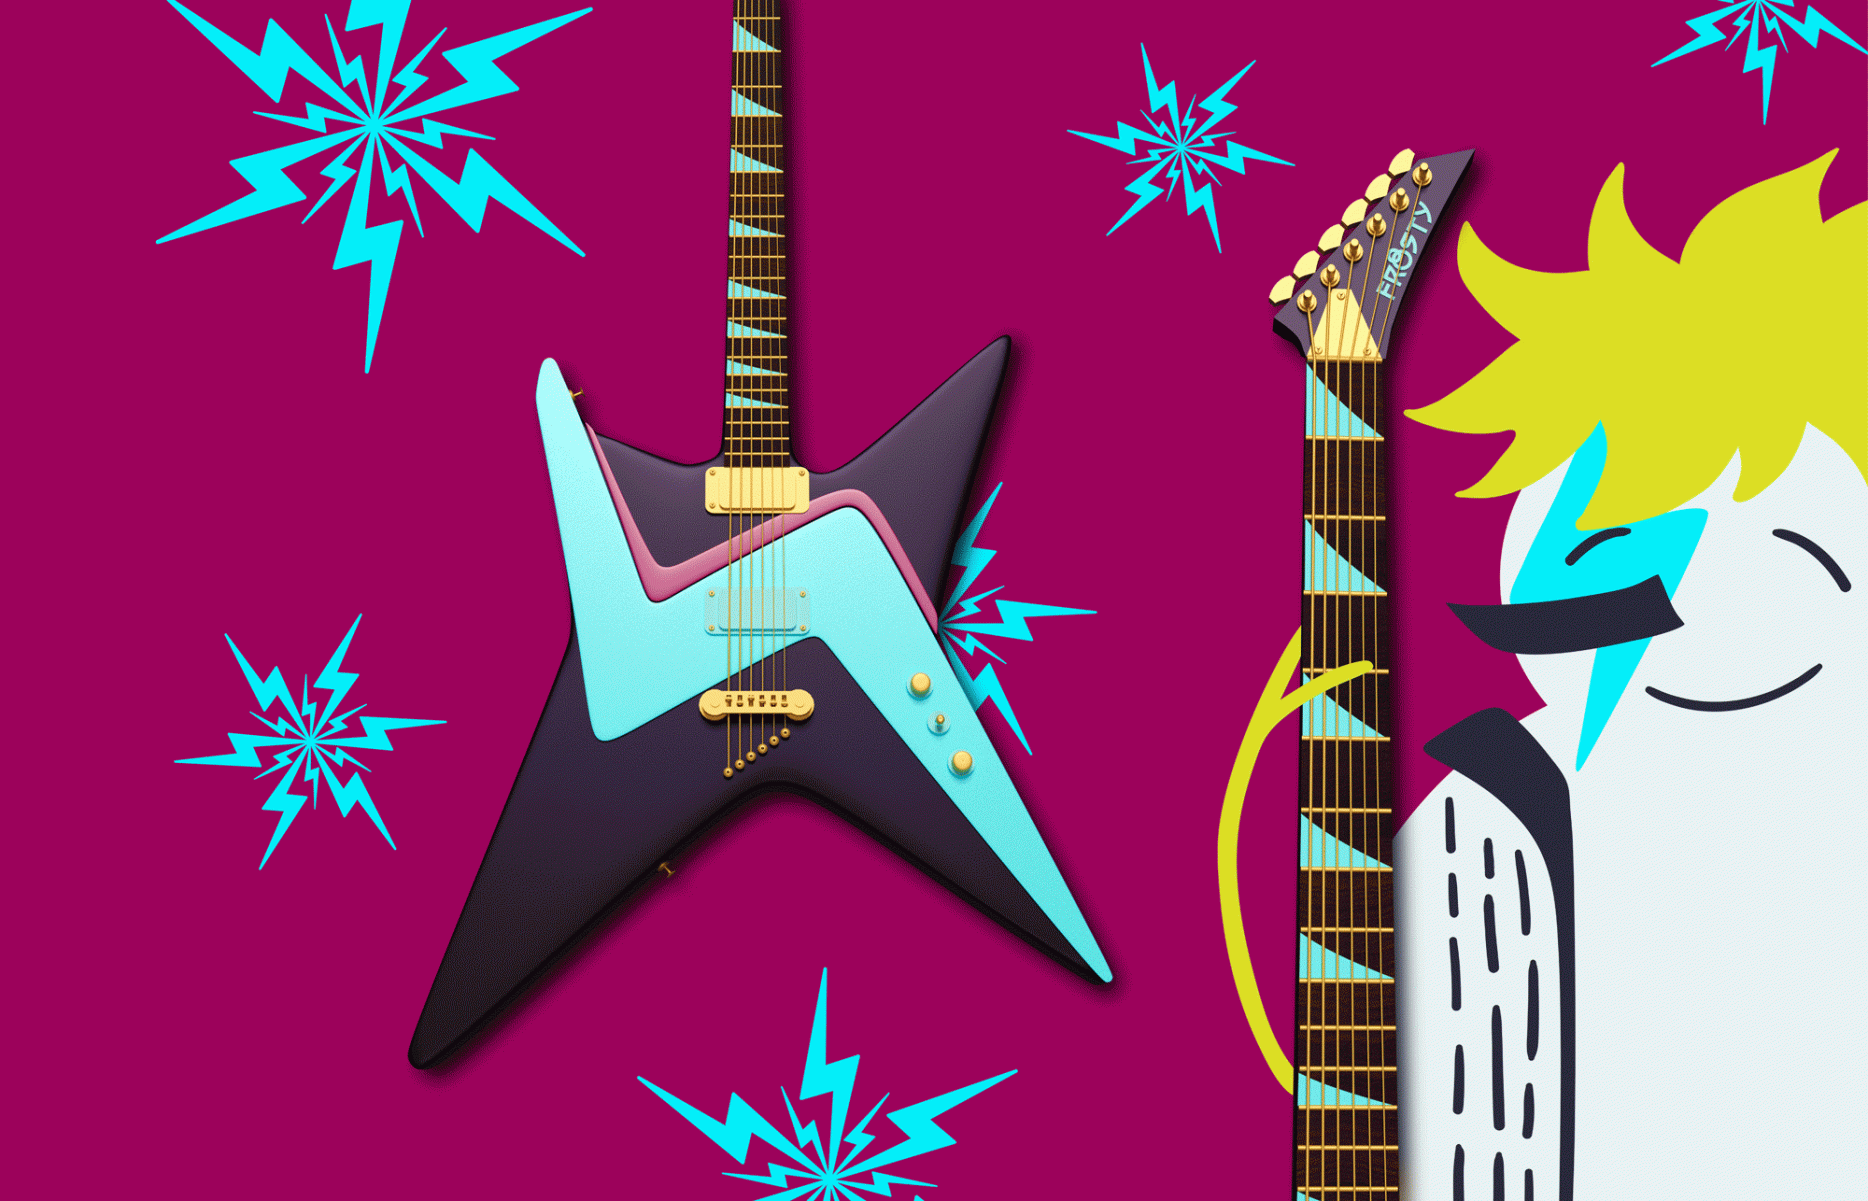 An animation with mockups of a branded drum kit and electric guitar for Frosty and his band